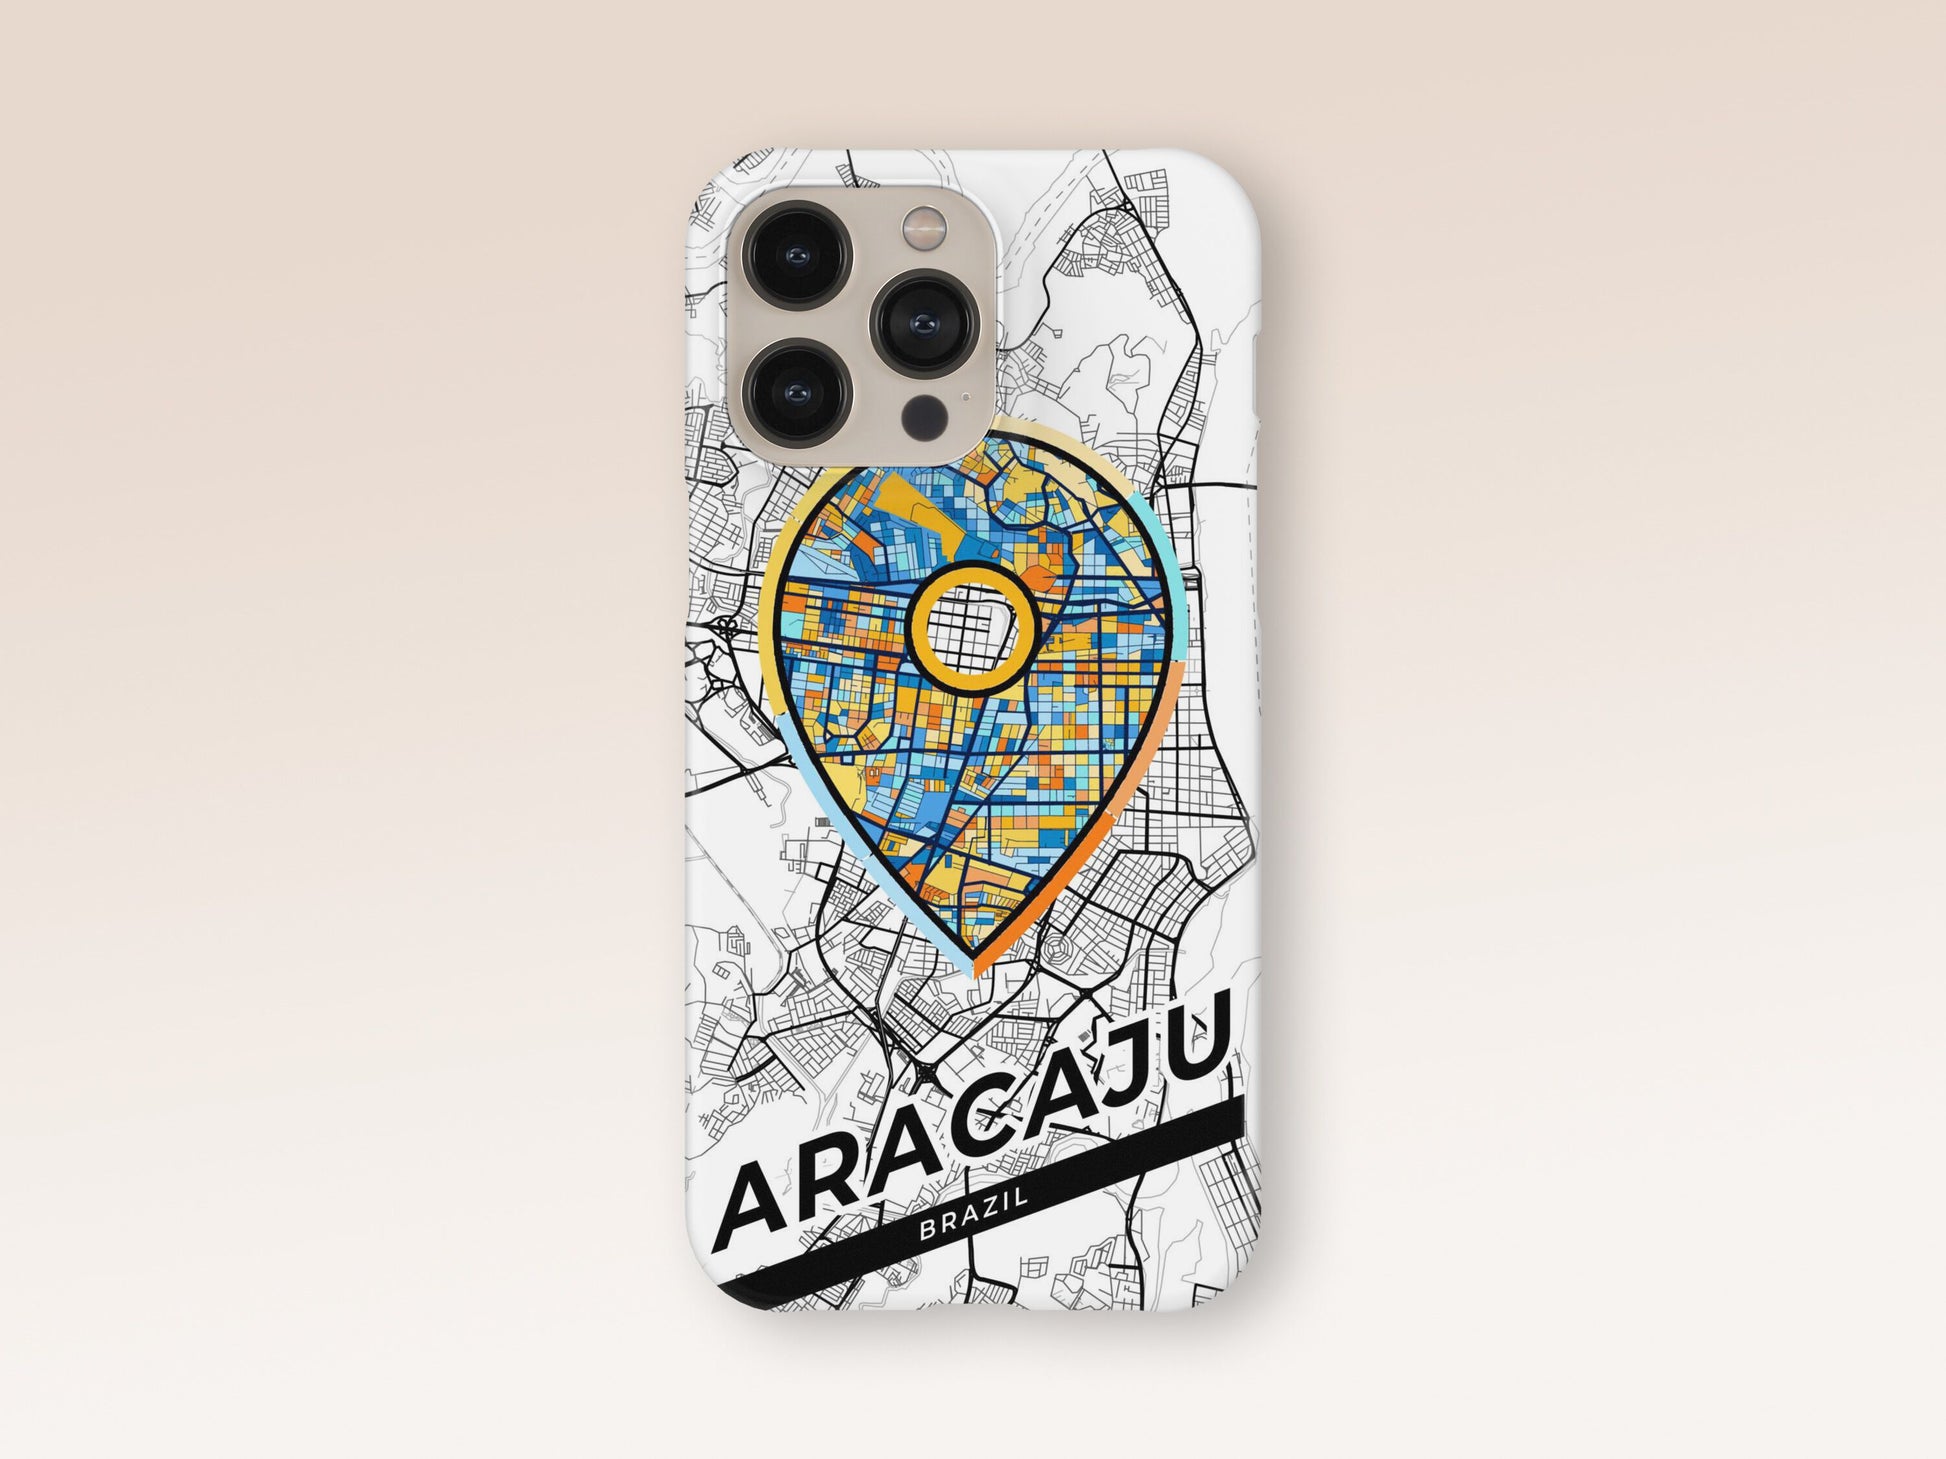 Aracaju Brazil slim phone case with colorful icon. Birthday, wedding or housewarming gift. Couple match cases. 1